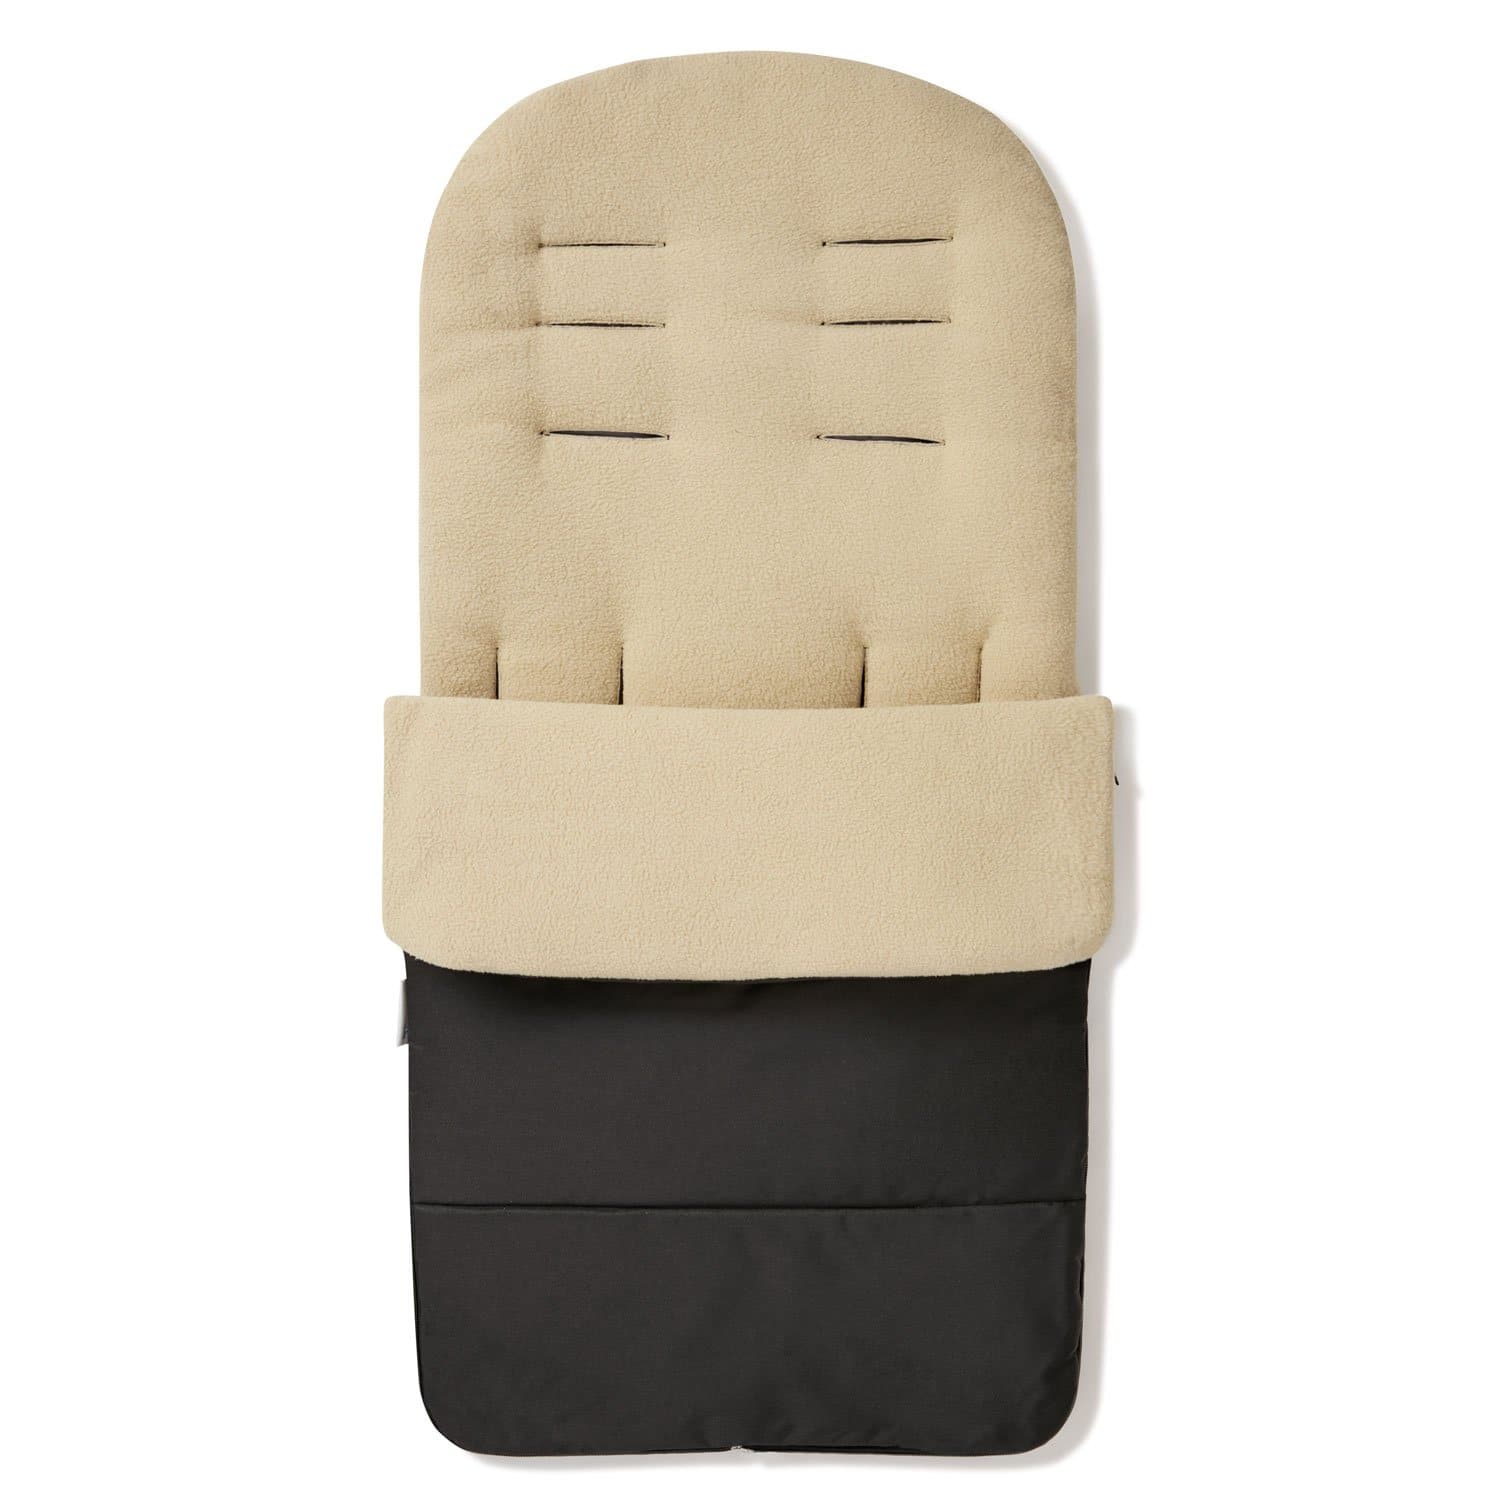 Premium Footmuff / Cosy Toes Compatible with I'coo - Desert Sand / Fits All Models | For Your Little One